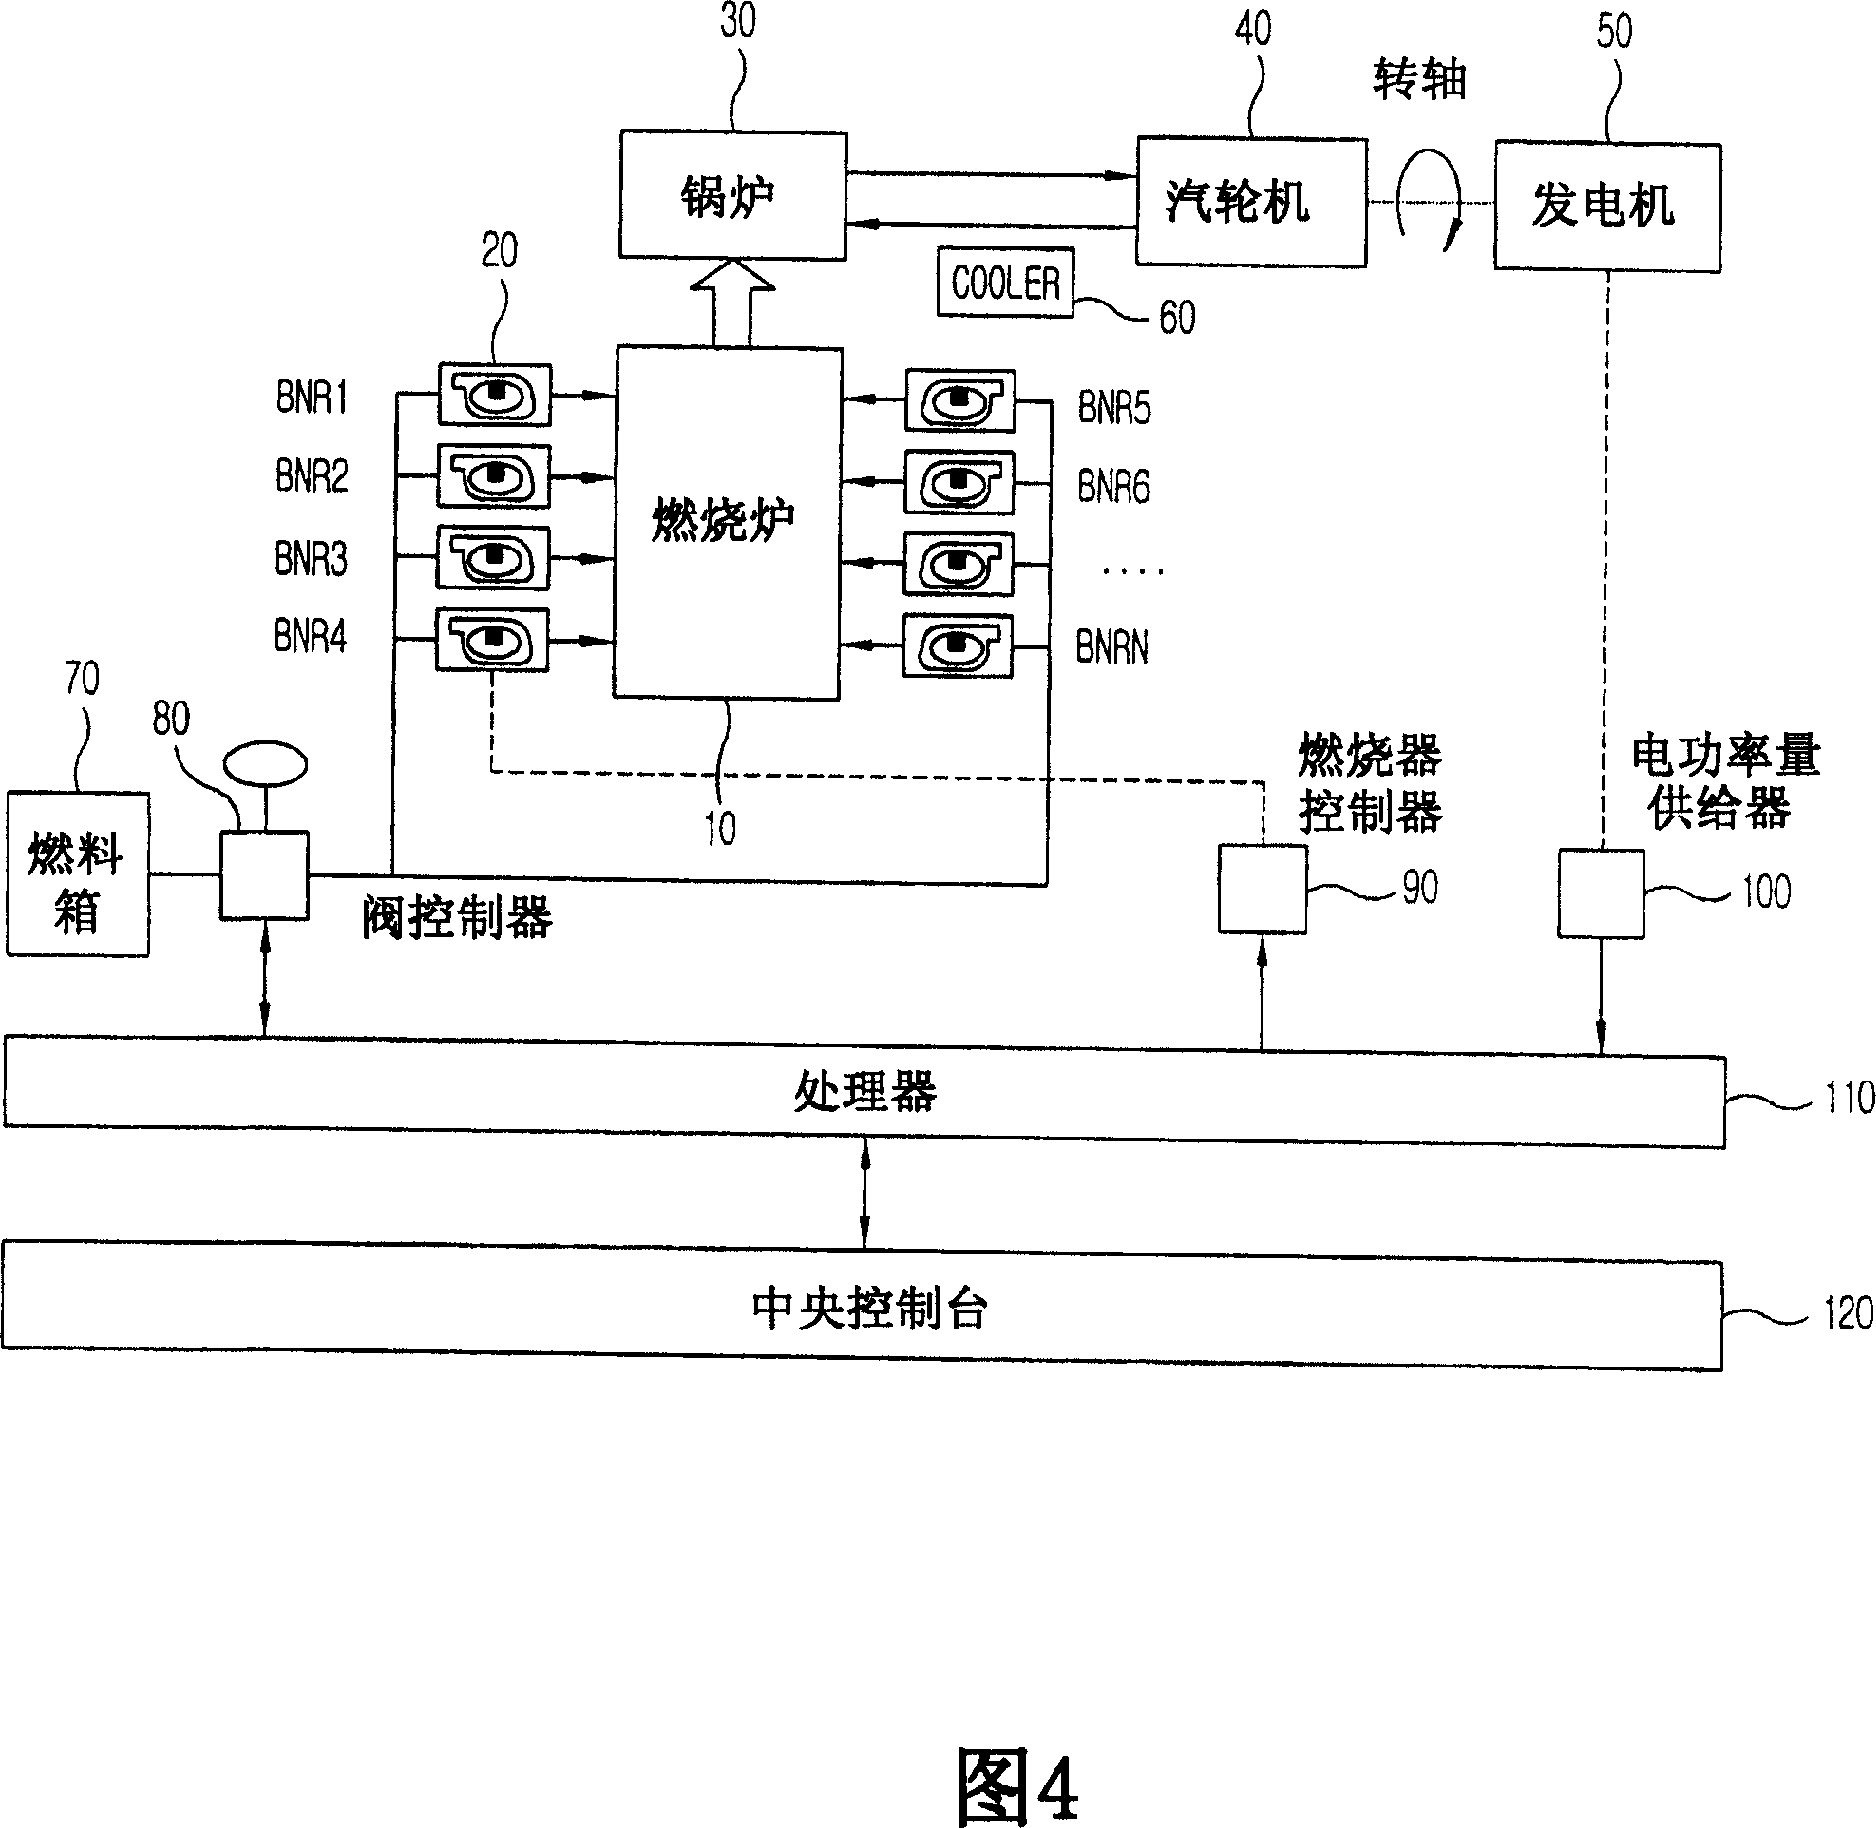 Automatic combustor control system for steam power generation station